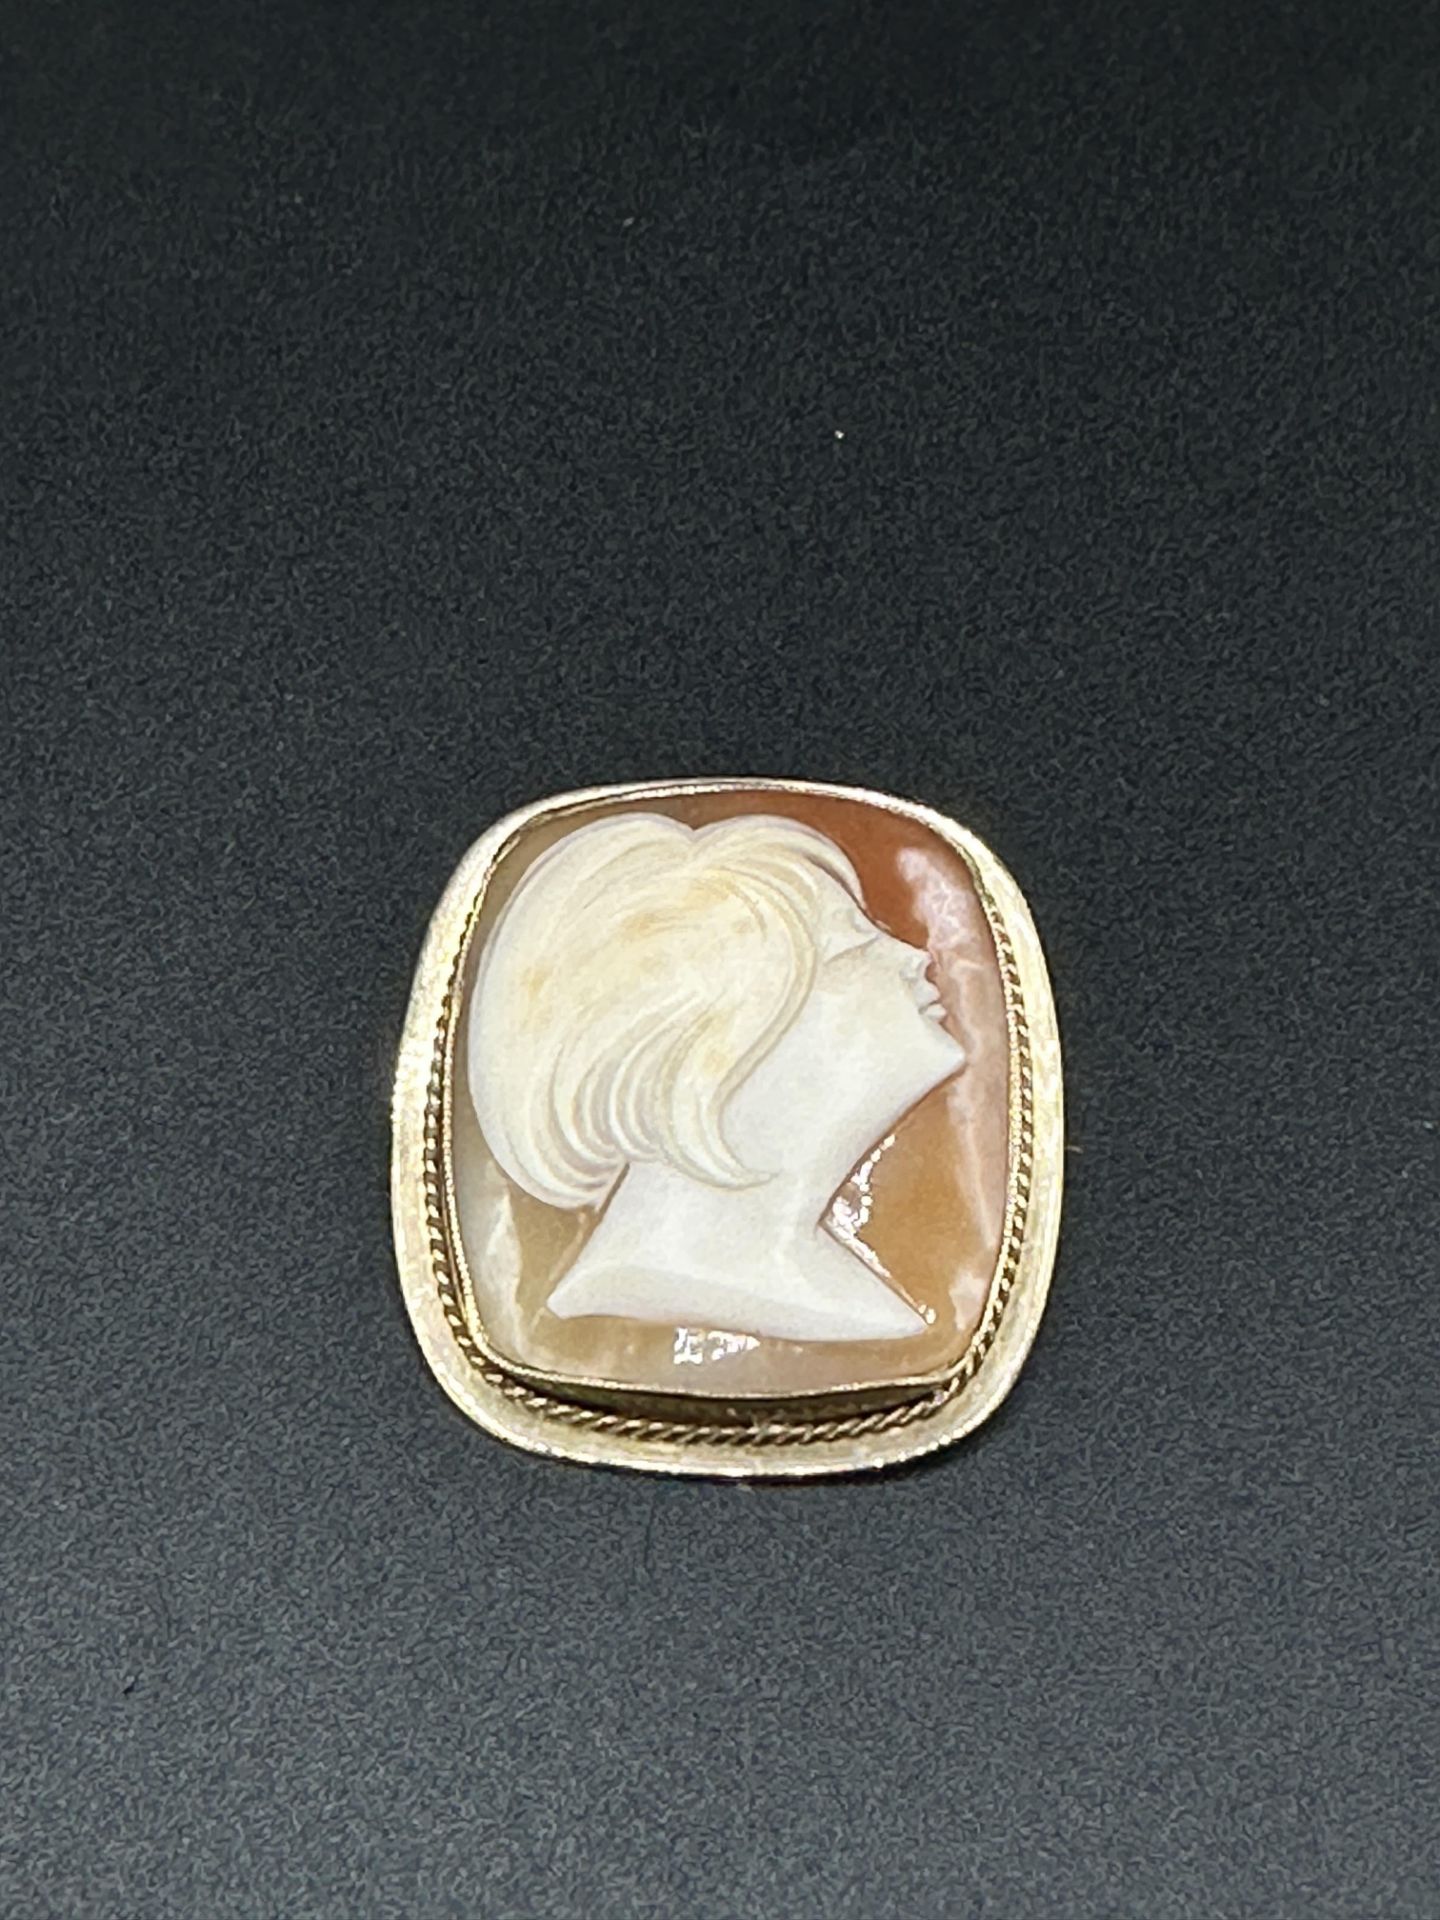 Three gold mounted cameo brooches - Image 3 of 7